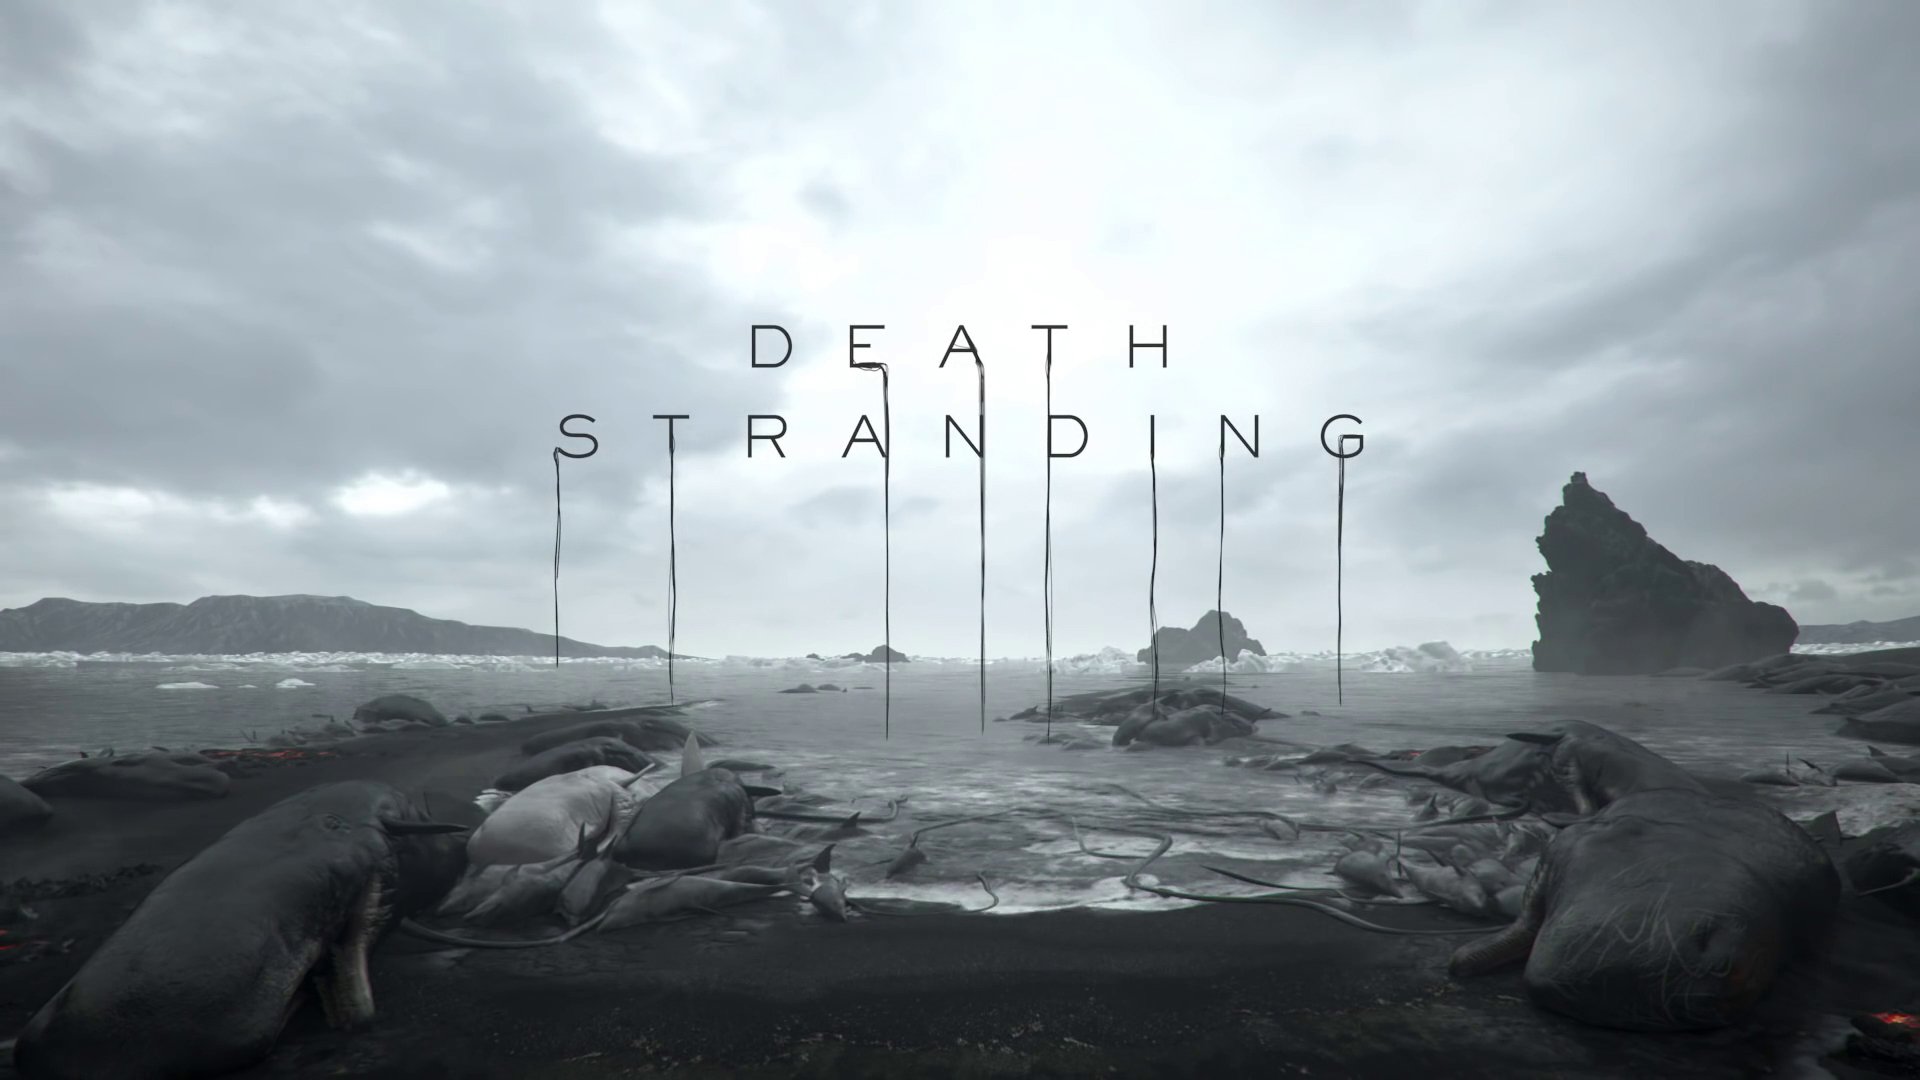 90+ Death Stranding HD Wallpapers and Backgrounds